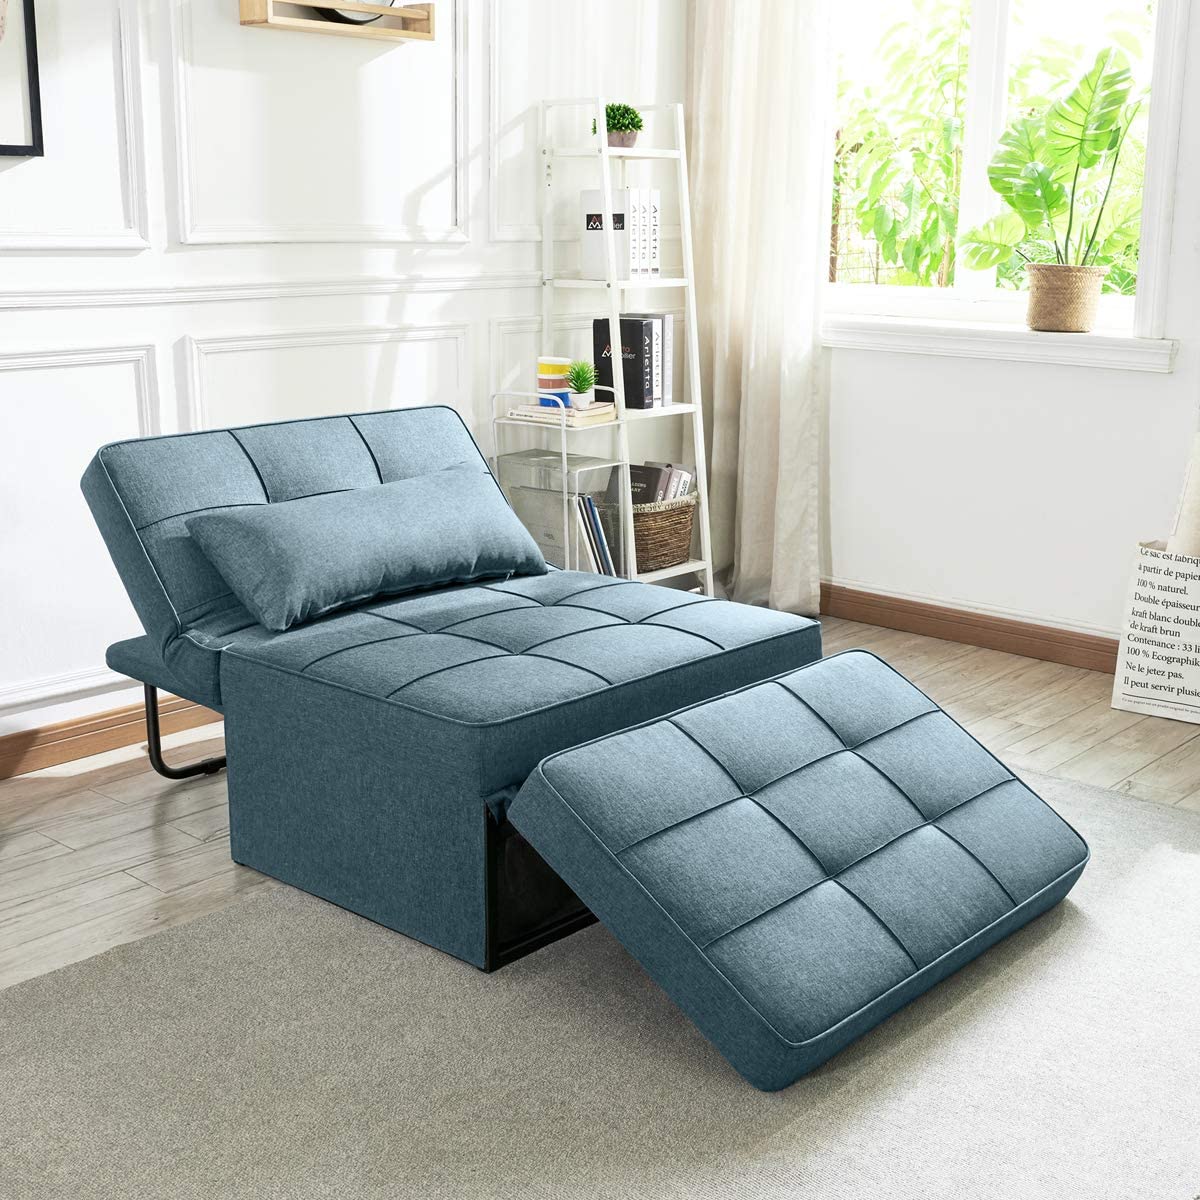 Vonanda Sofa Bed, Convertible Chair 4 in 1 Multi-Function Folding Ottoman Modern Breathable Linen Guest Bed with Adjustable Sleeper